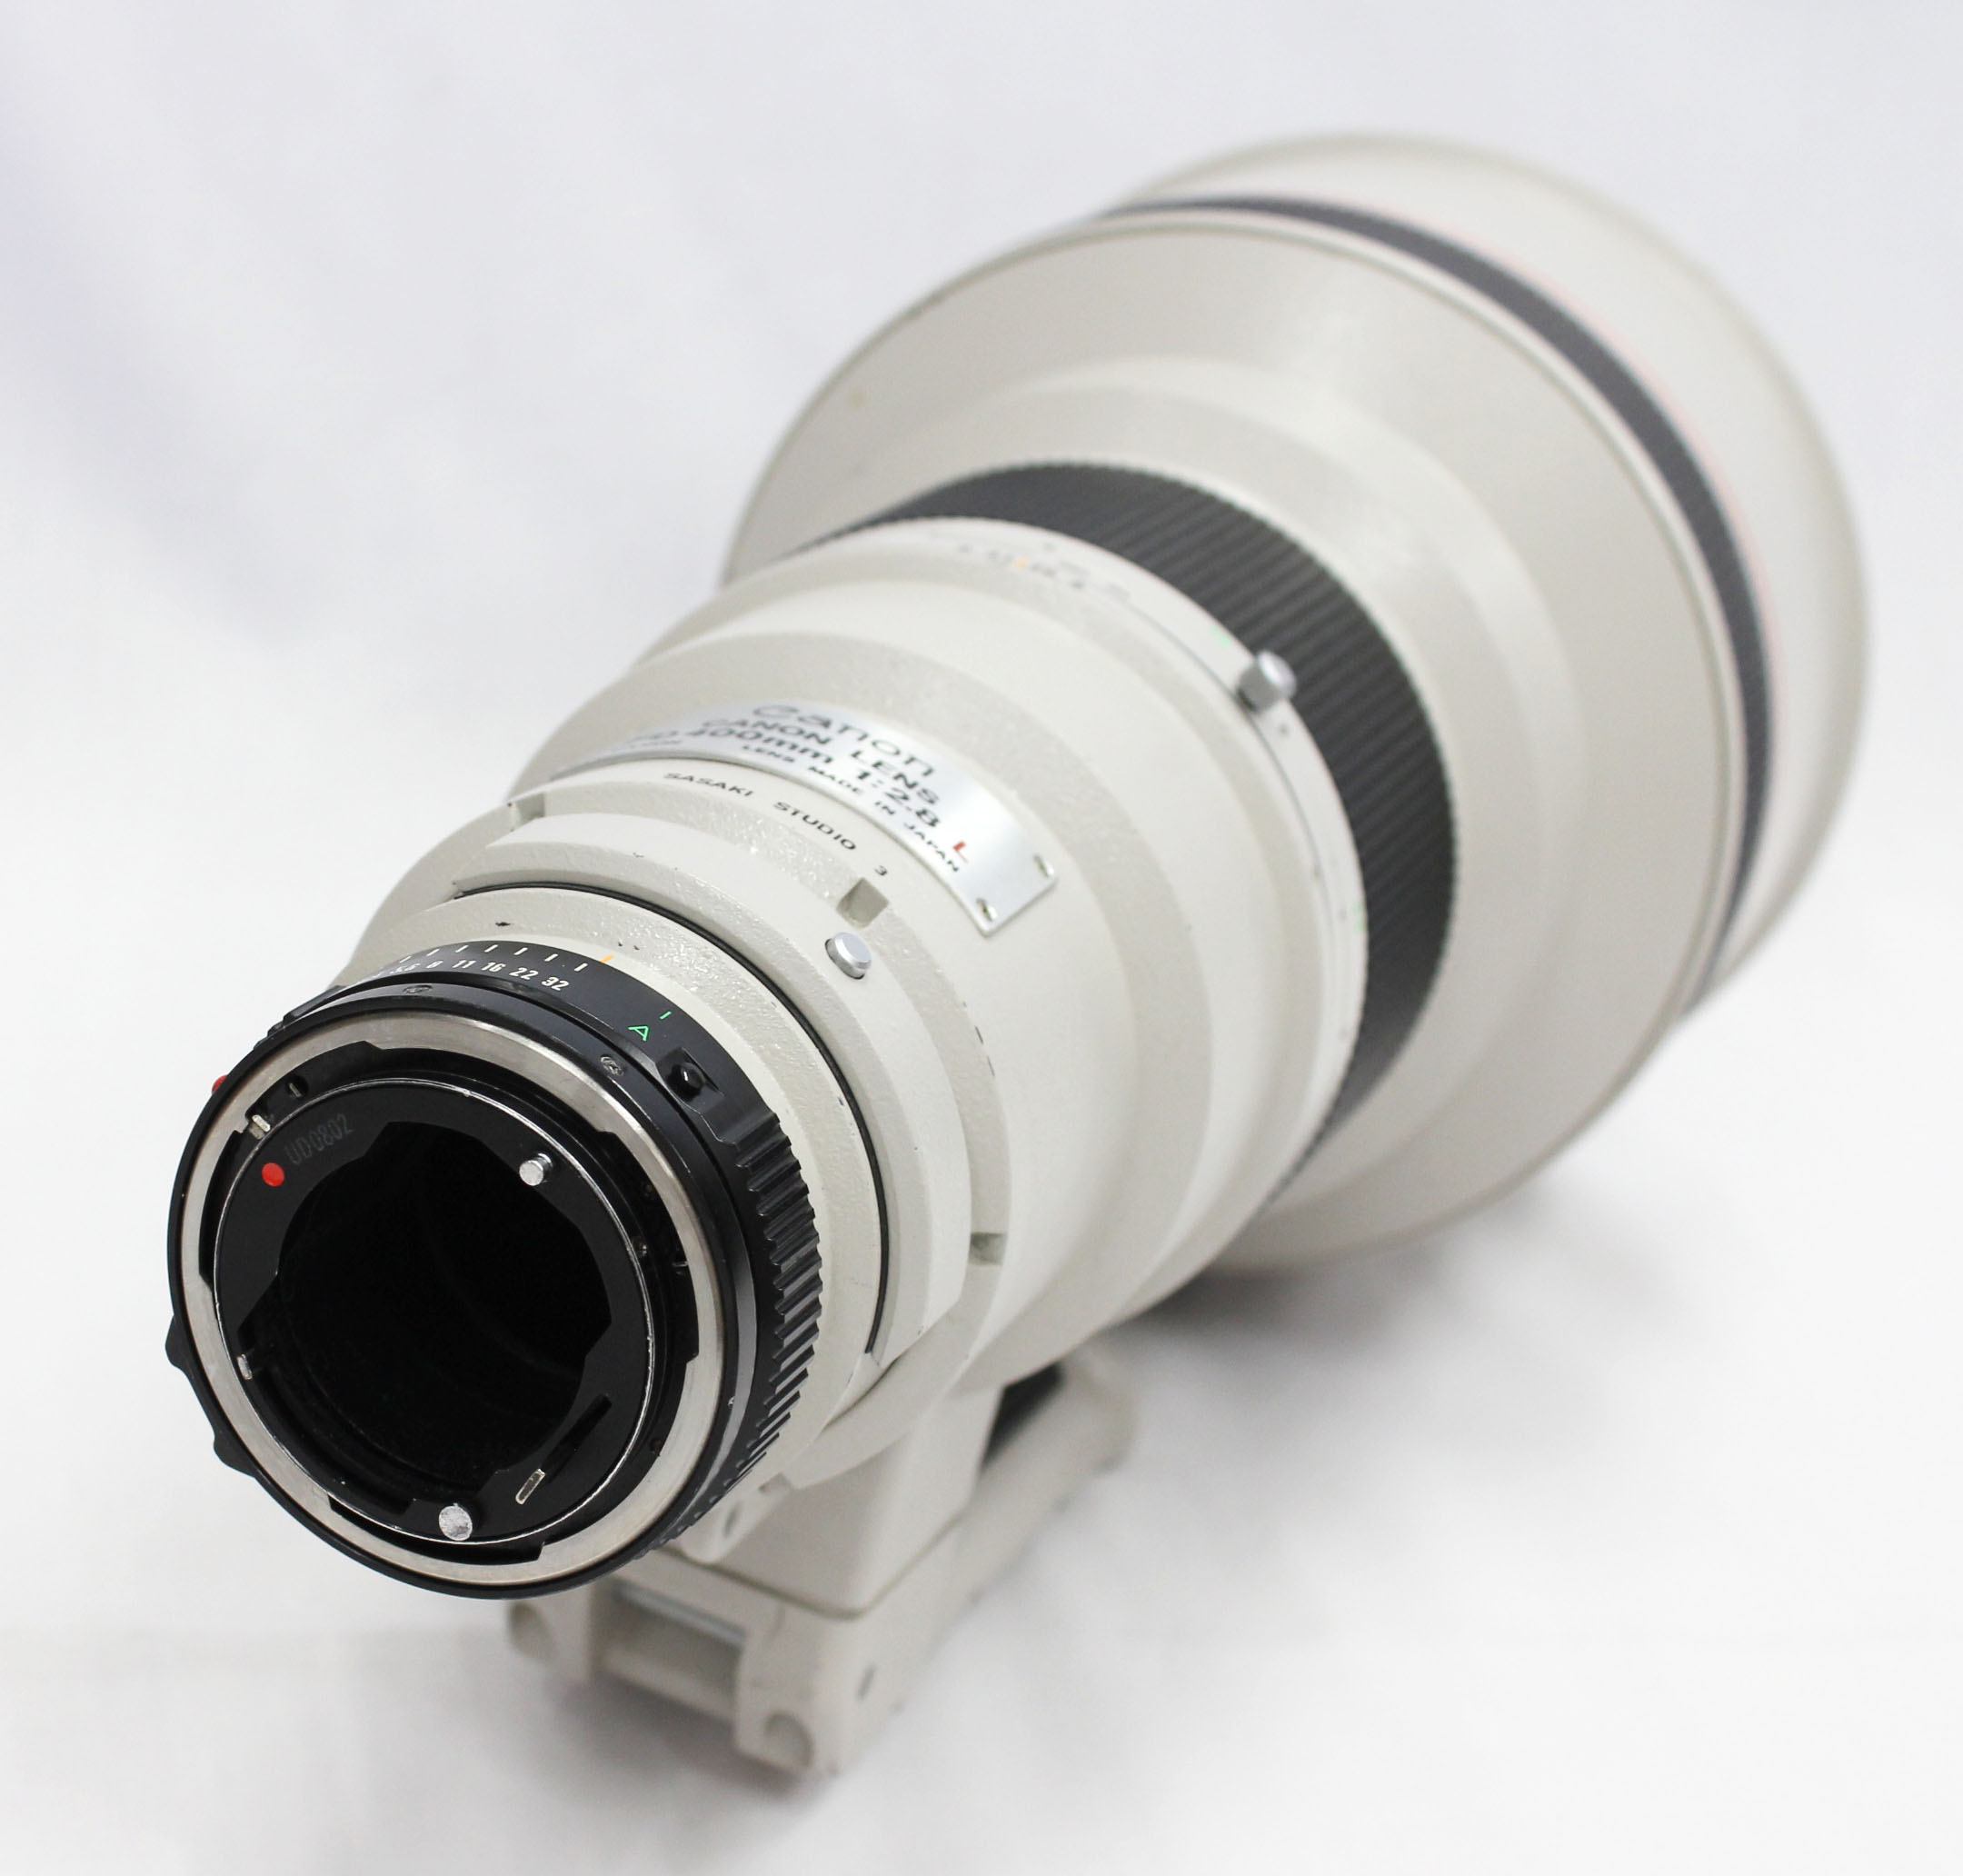  Canon New FD NFD 400mm F/2.8 L MF Telephoto Lens from Japan Photo 2